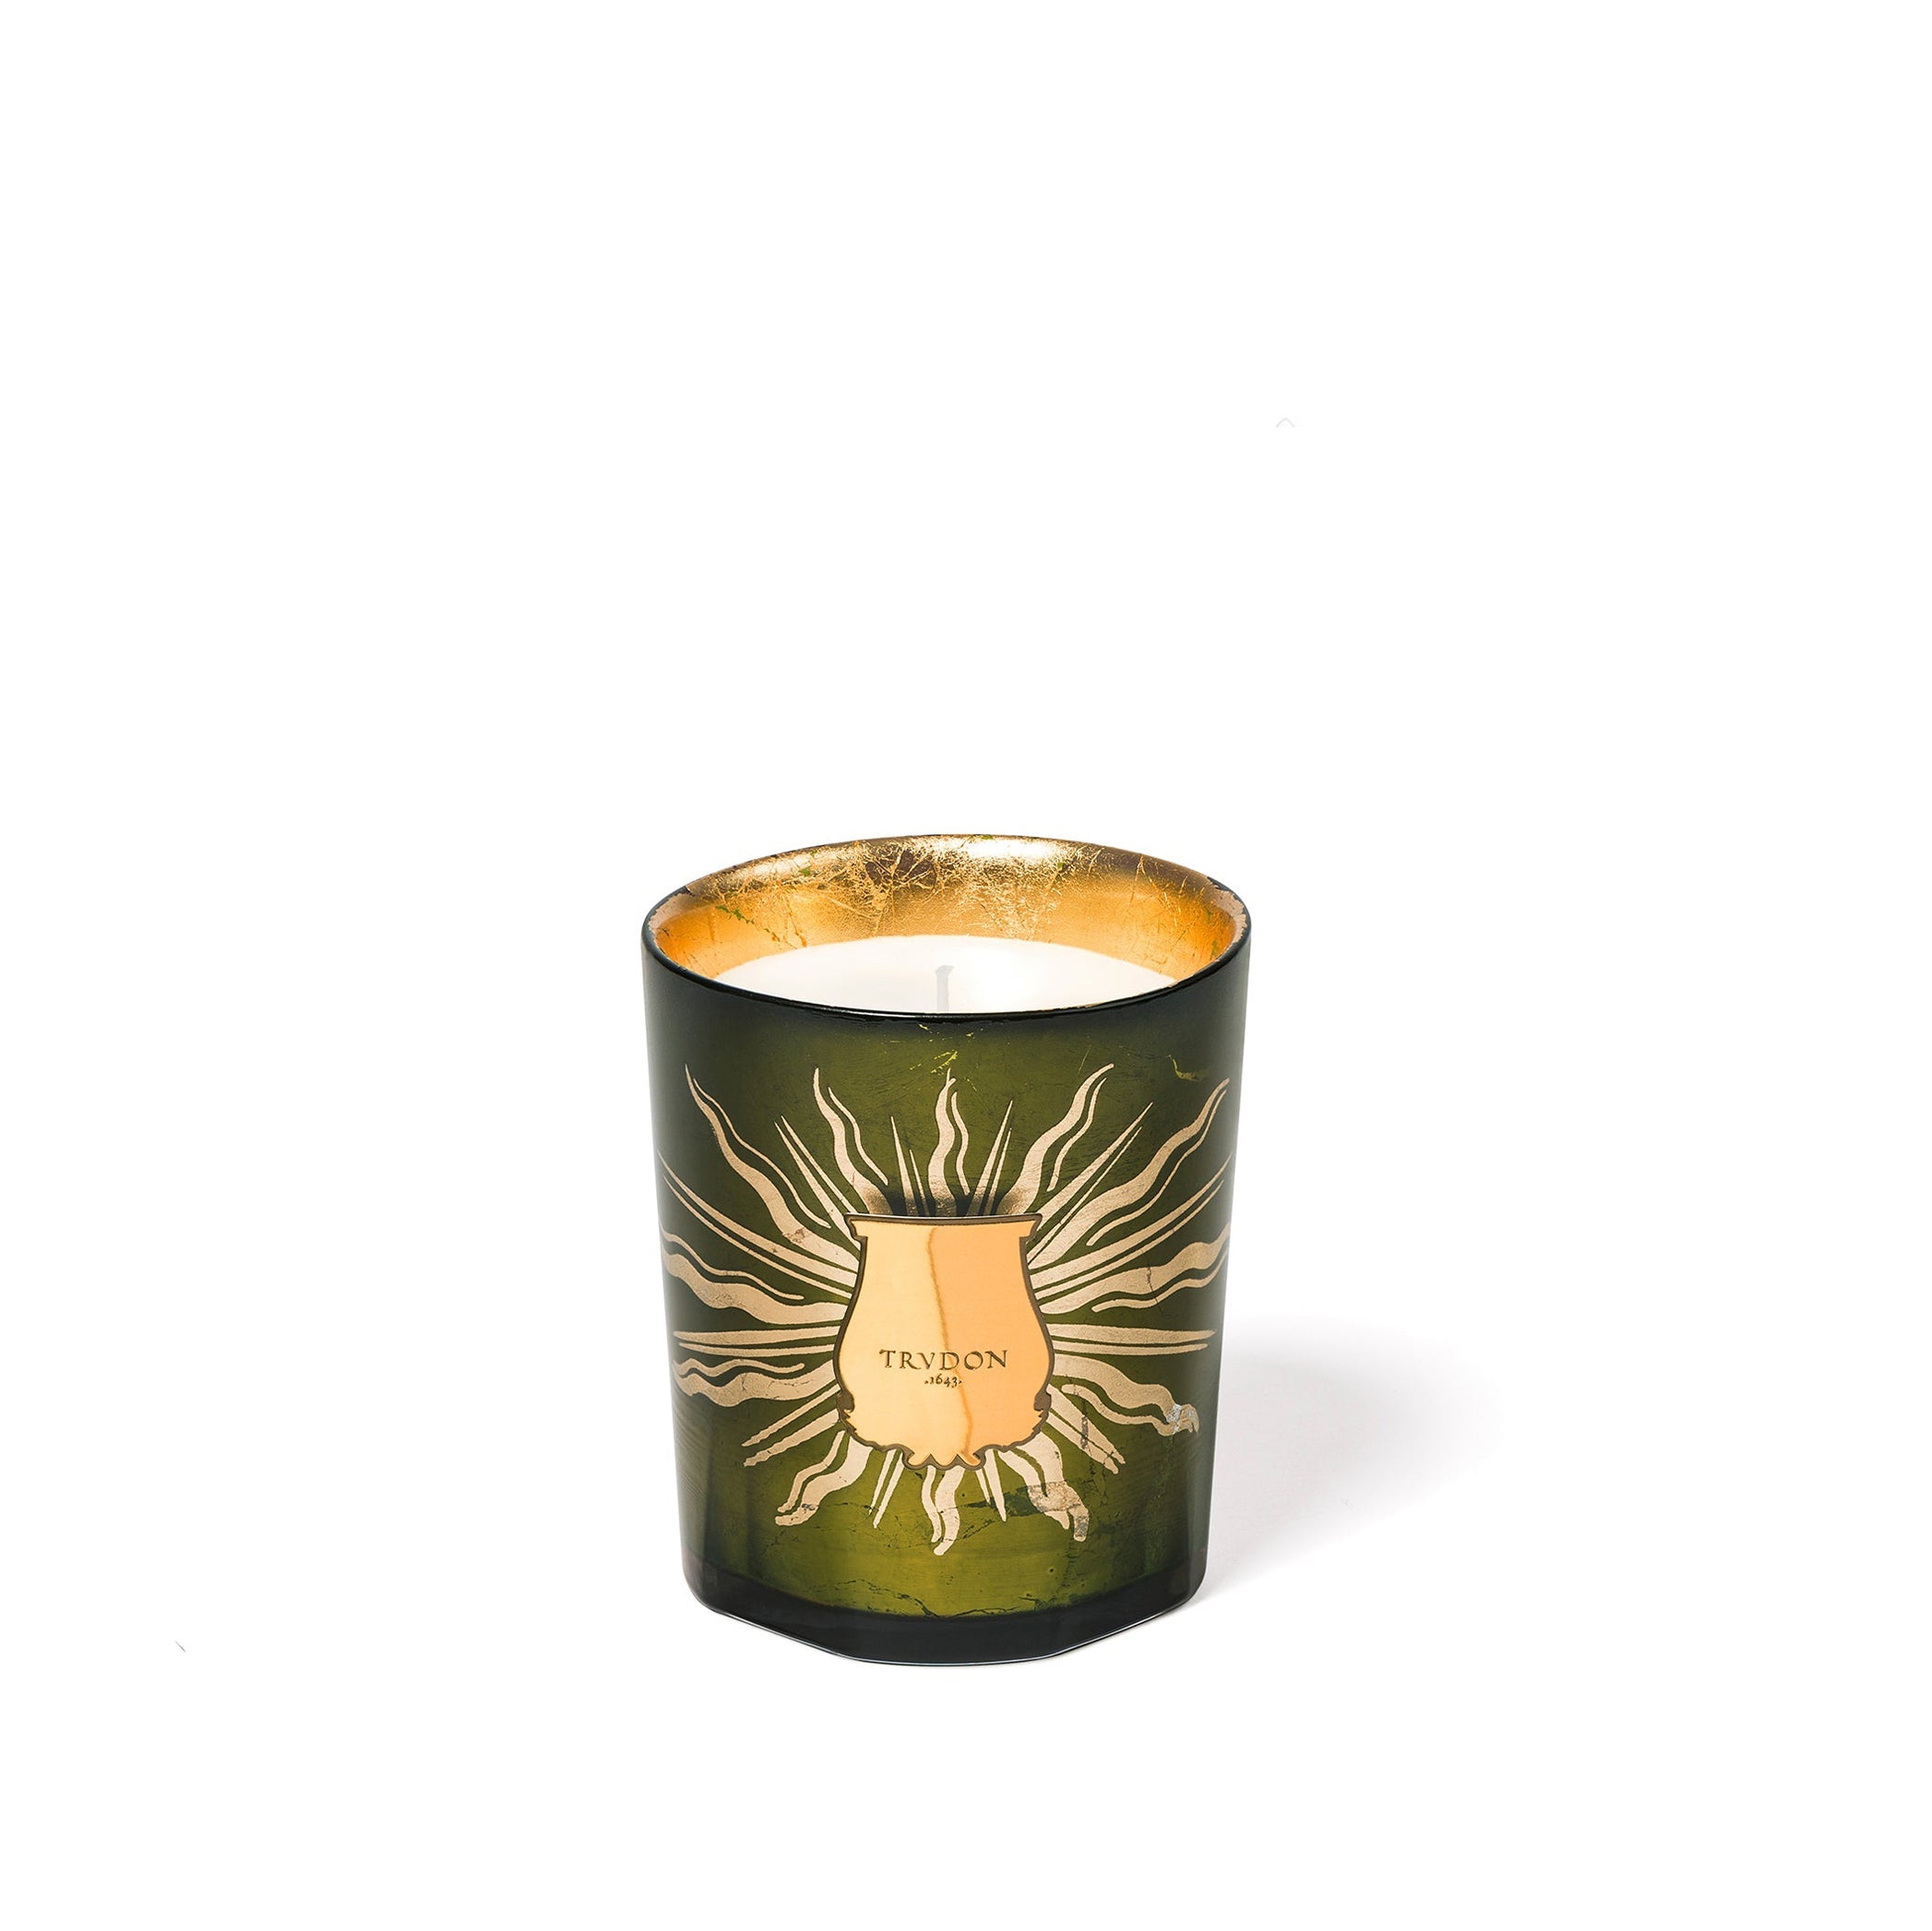 Christmas Limited Edition Astral Gabriel Candle by Trudon, 270g